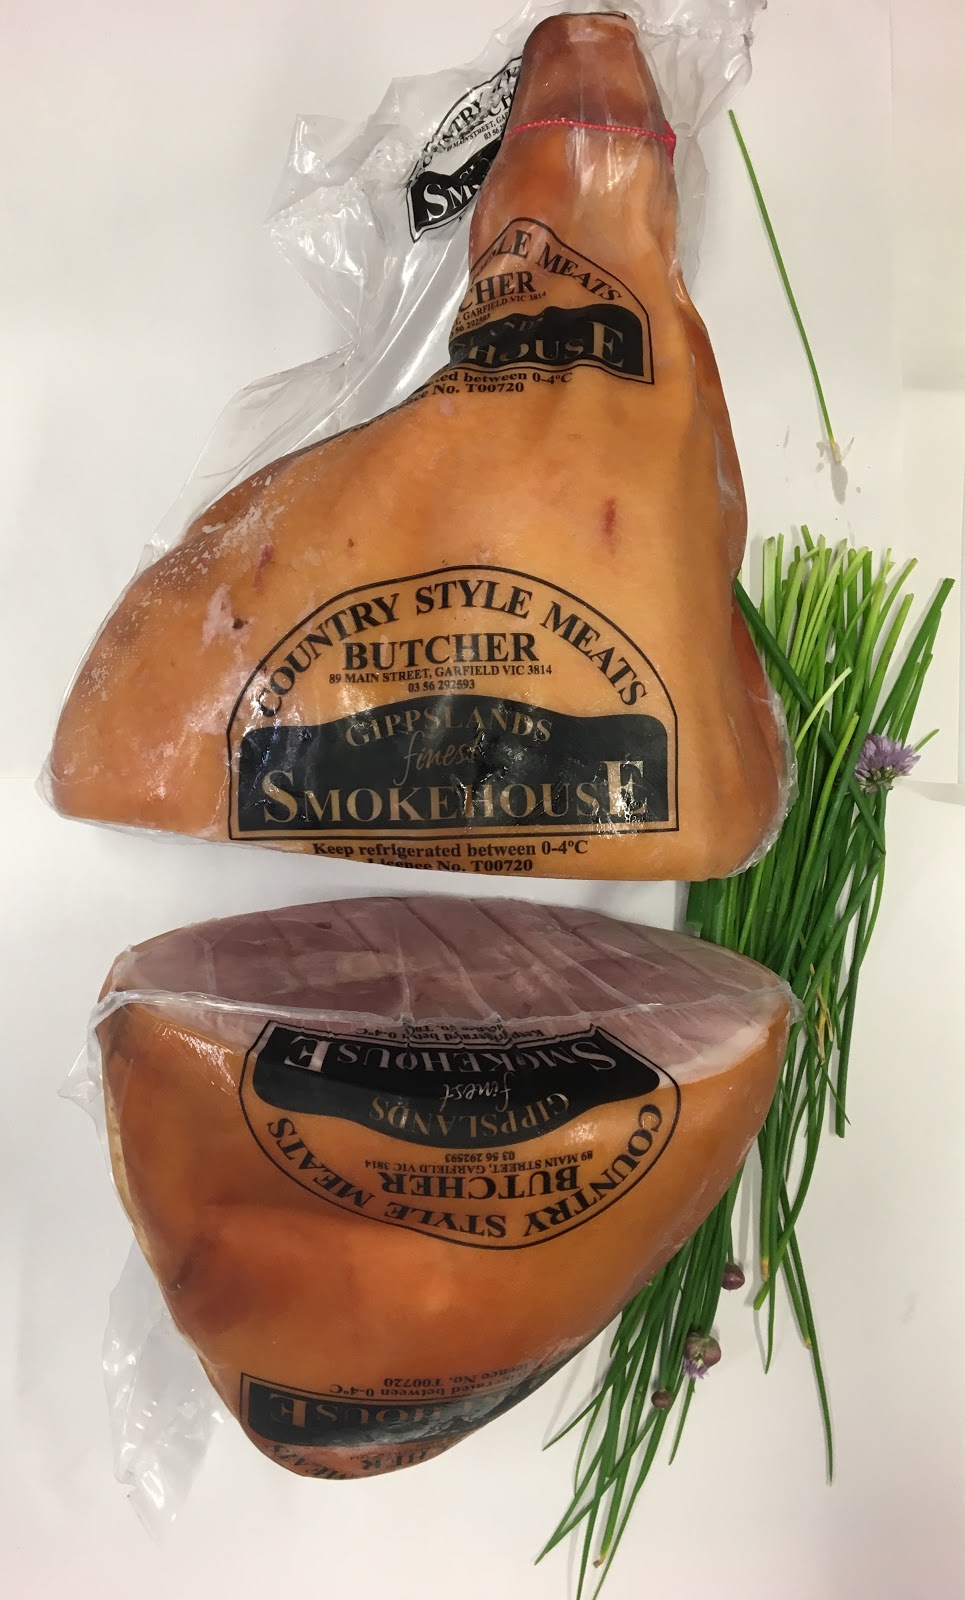 Country Style Meats. Butcher & Smokehouse | store | 89 Nar Nar Goon - Longwarry Rd, Garfield VIC 3814, Australia | 0356292593 OR +61 3 5629 2593